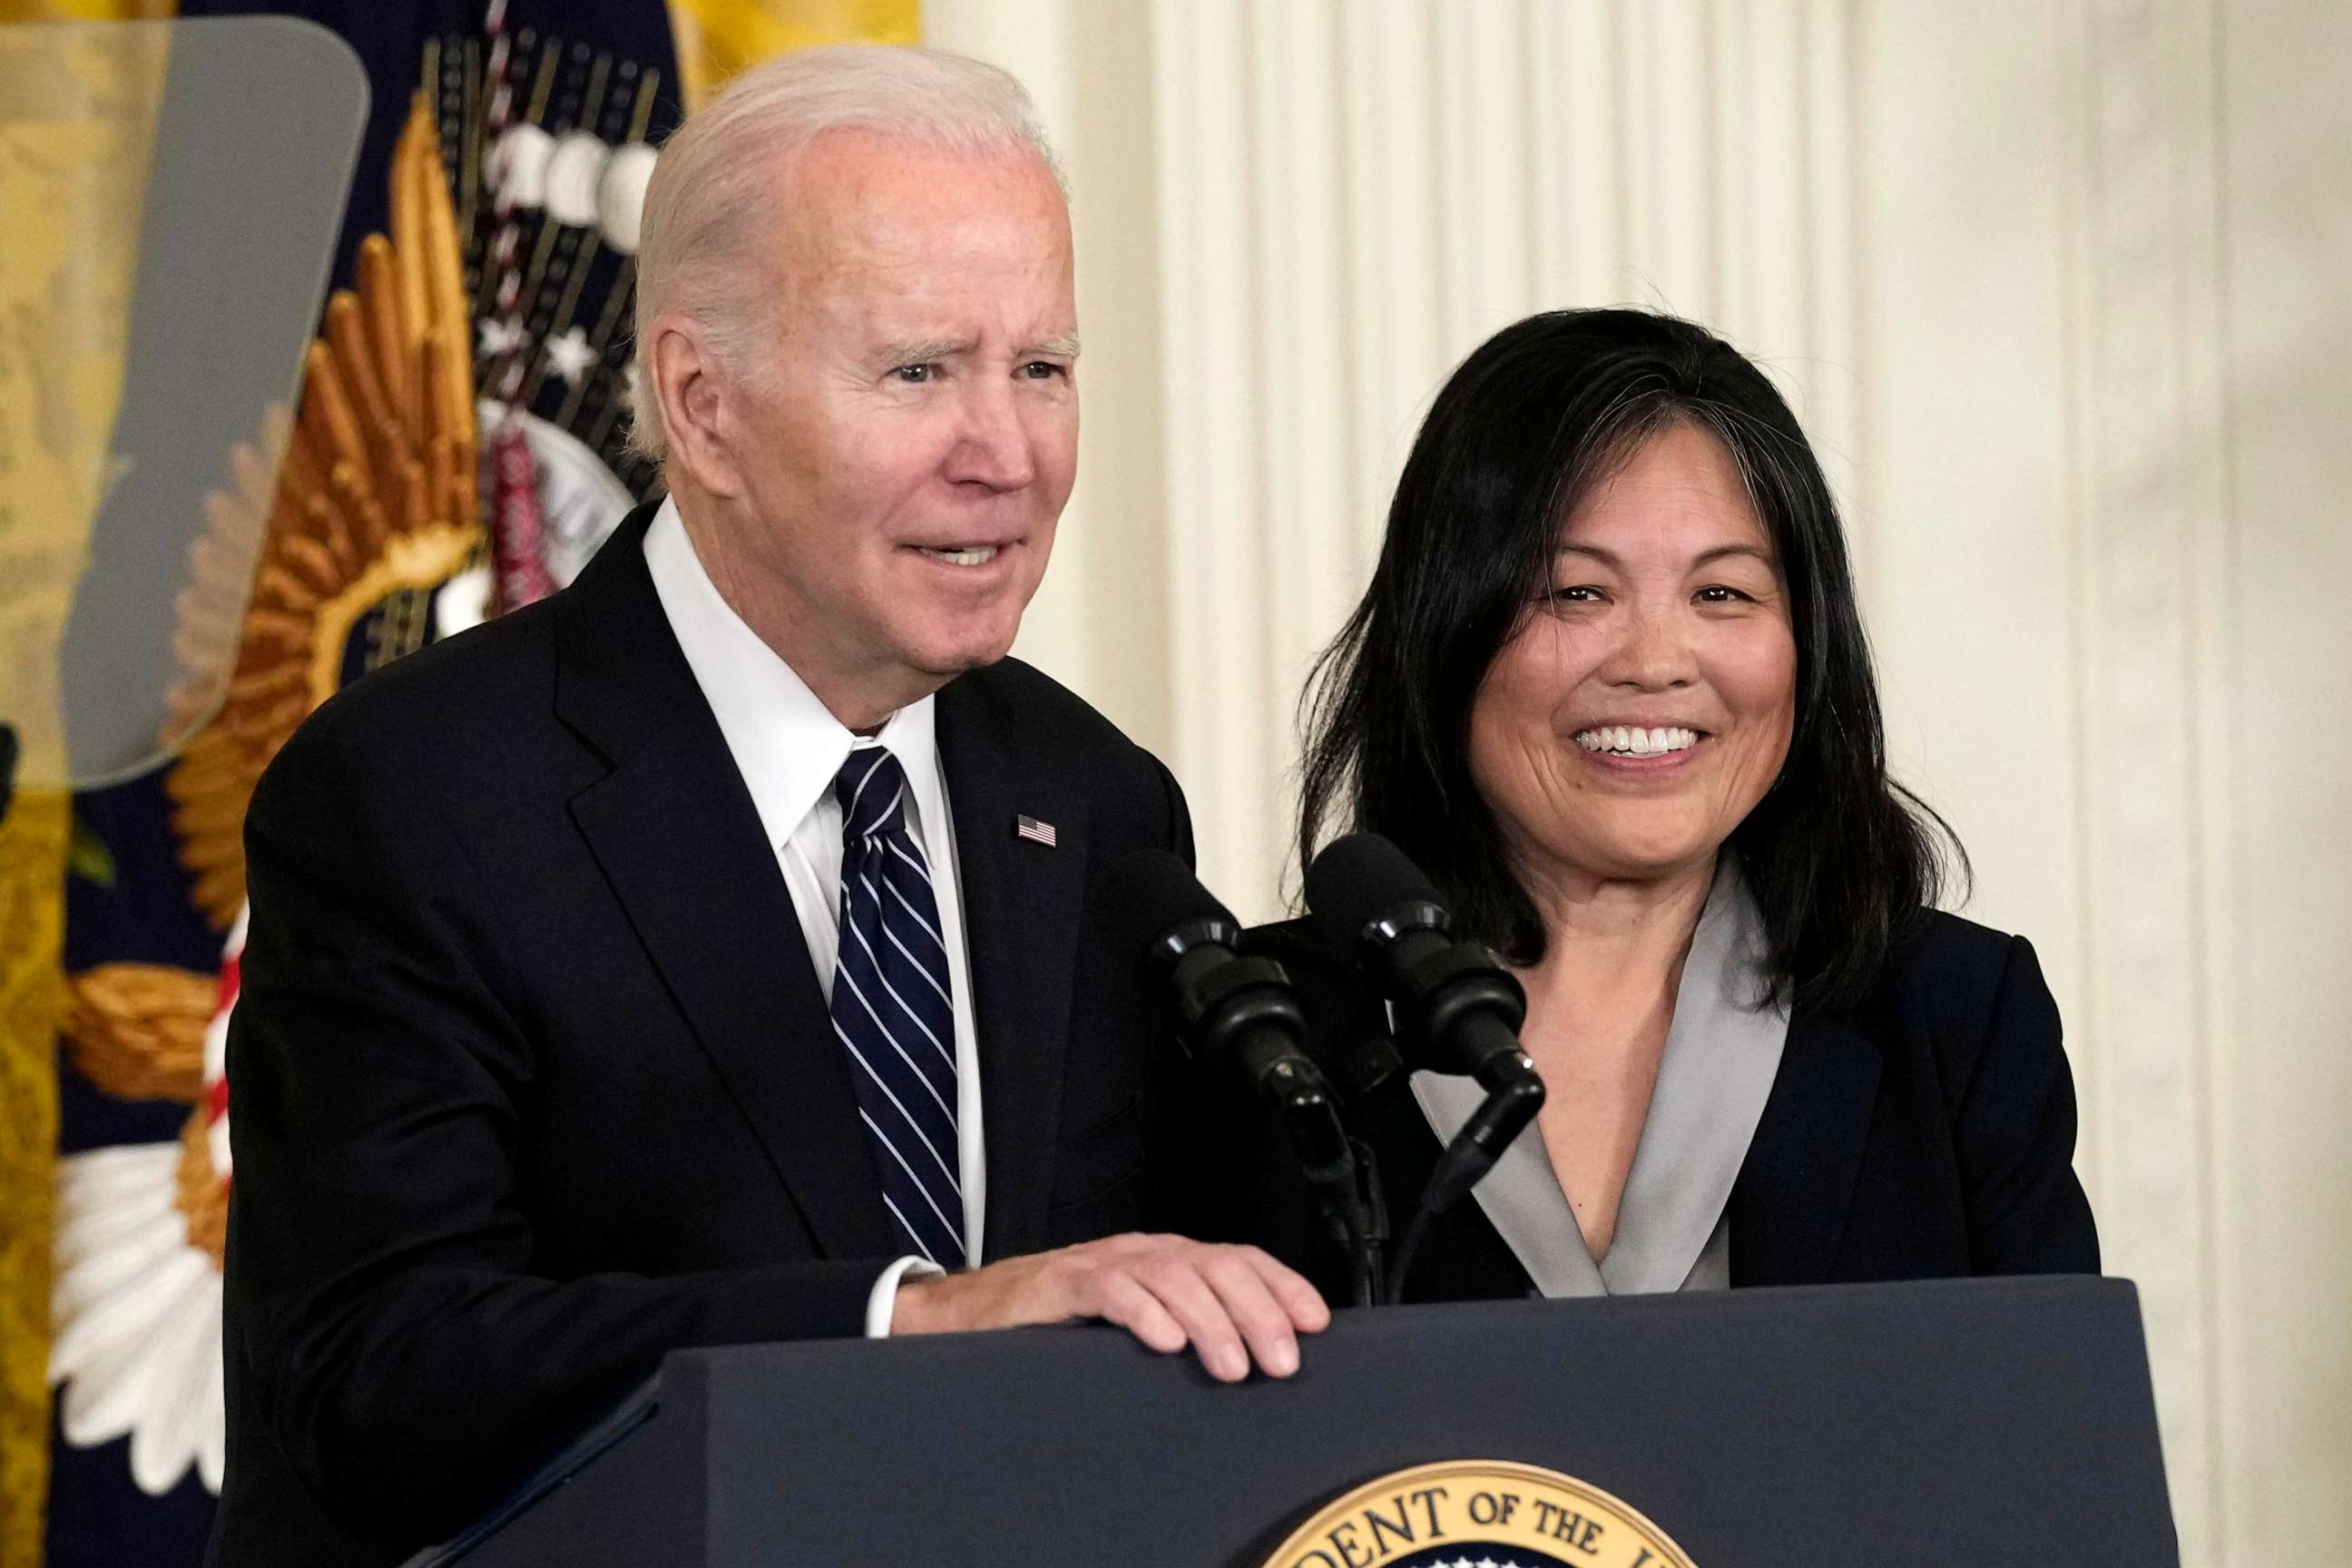 PHOTO: President Joe Biden talks about his nomination of Julie Su, right, to serve as the Secretary of Labor during an event in the East Room of the White House in Washington, March 1, 2023.